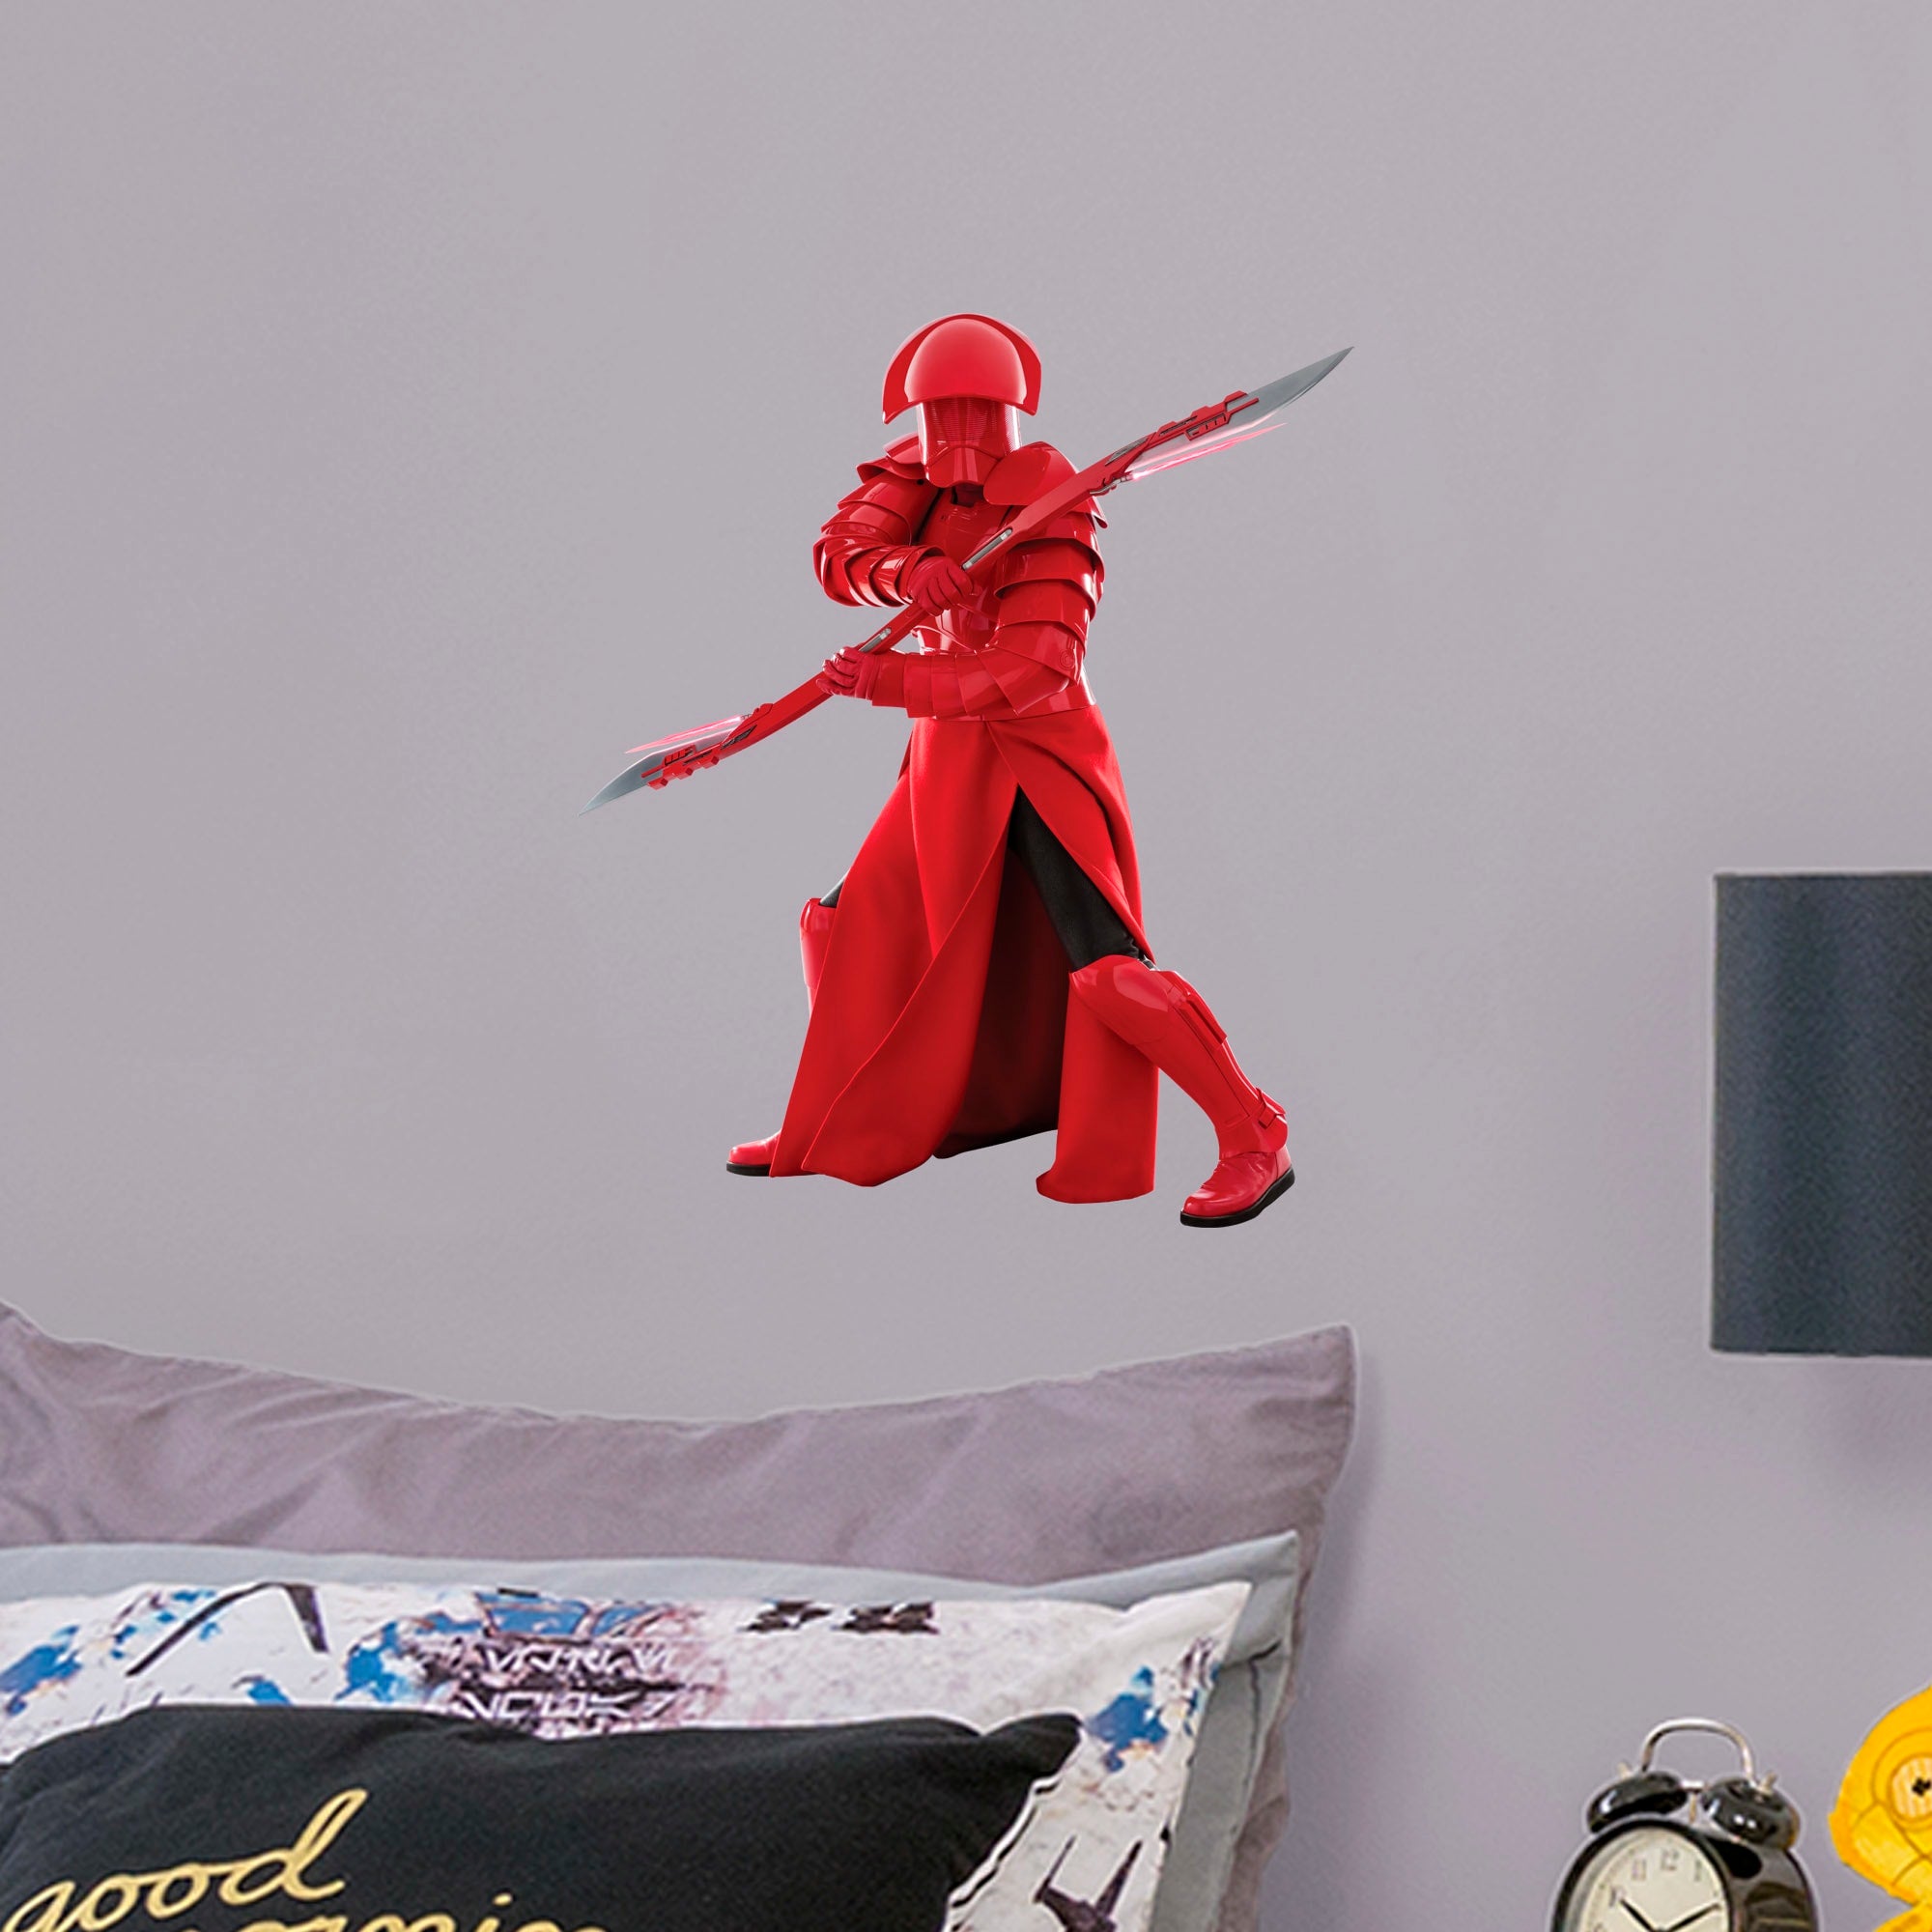 Praetorian Guard - Officially Licensed Removable Wall Decal Large by Fathead | Vinyl